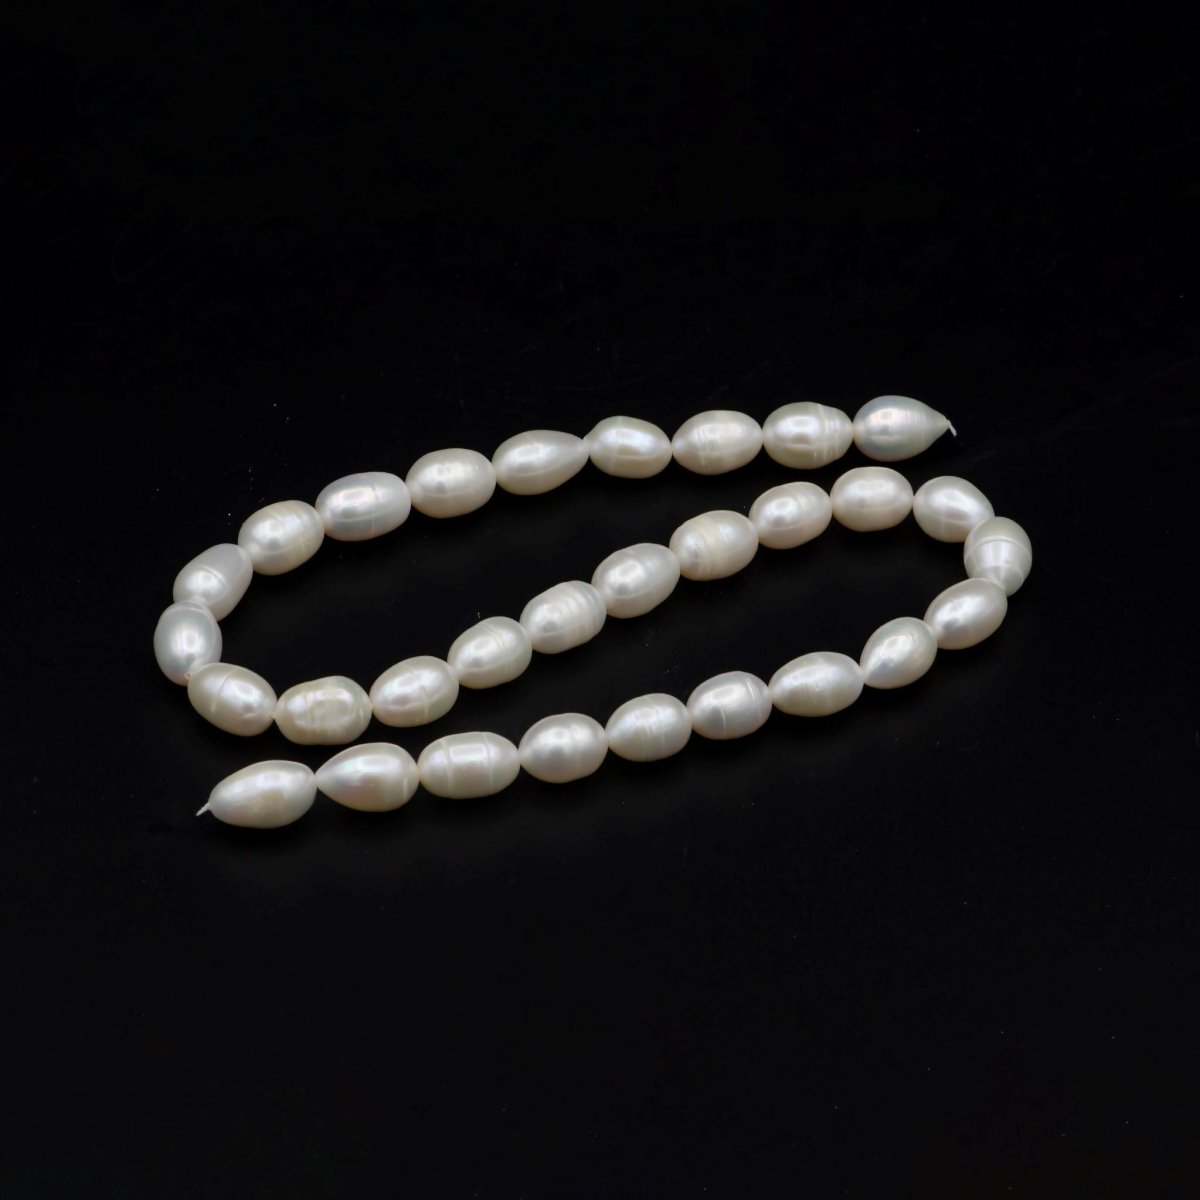 AAA 8.2-69.1mm white oval freshwater pearls, high quality, white rice pearl, Full Strand, Freshwater Pearl Rice Beads | WA-577 Clearance Pricing - DLUXCA